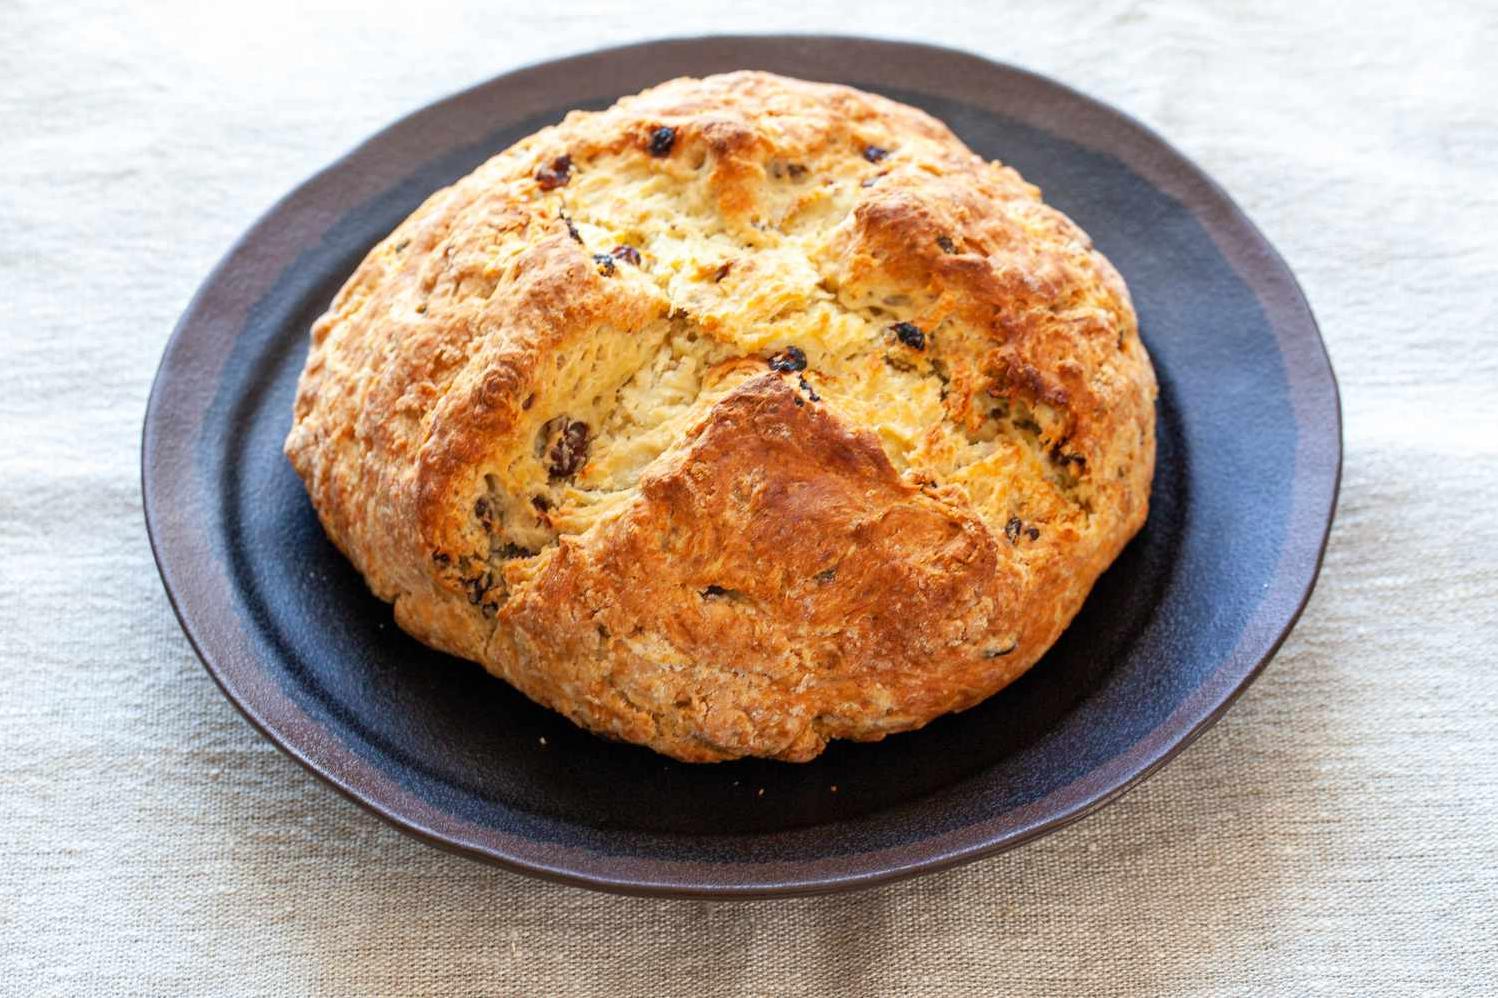  This recipe uses simple and wholesome ingredients to make a loaf that's full of flavor.